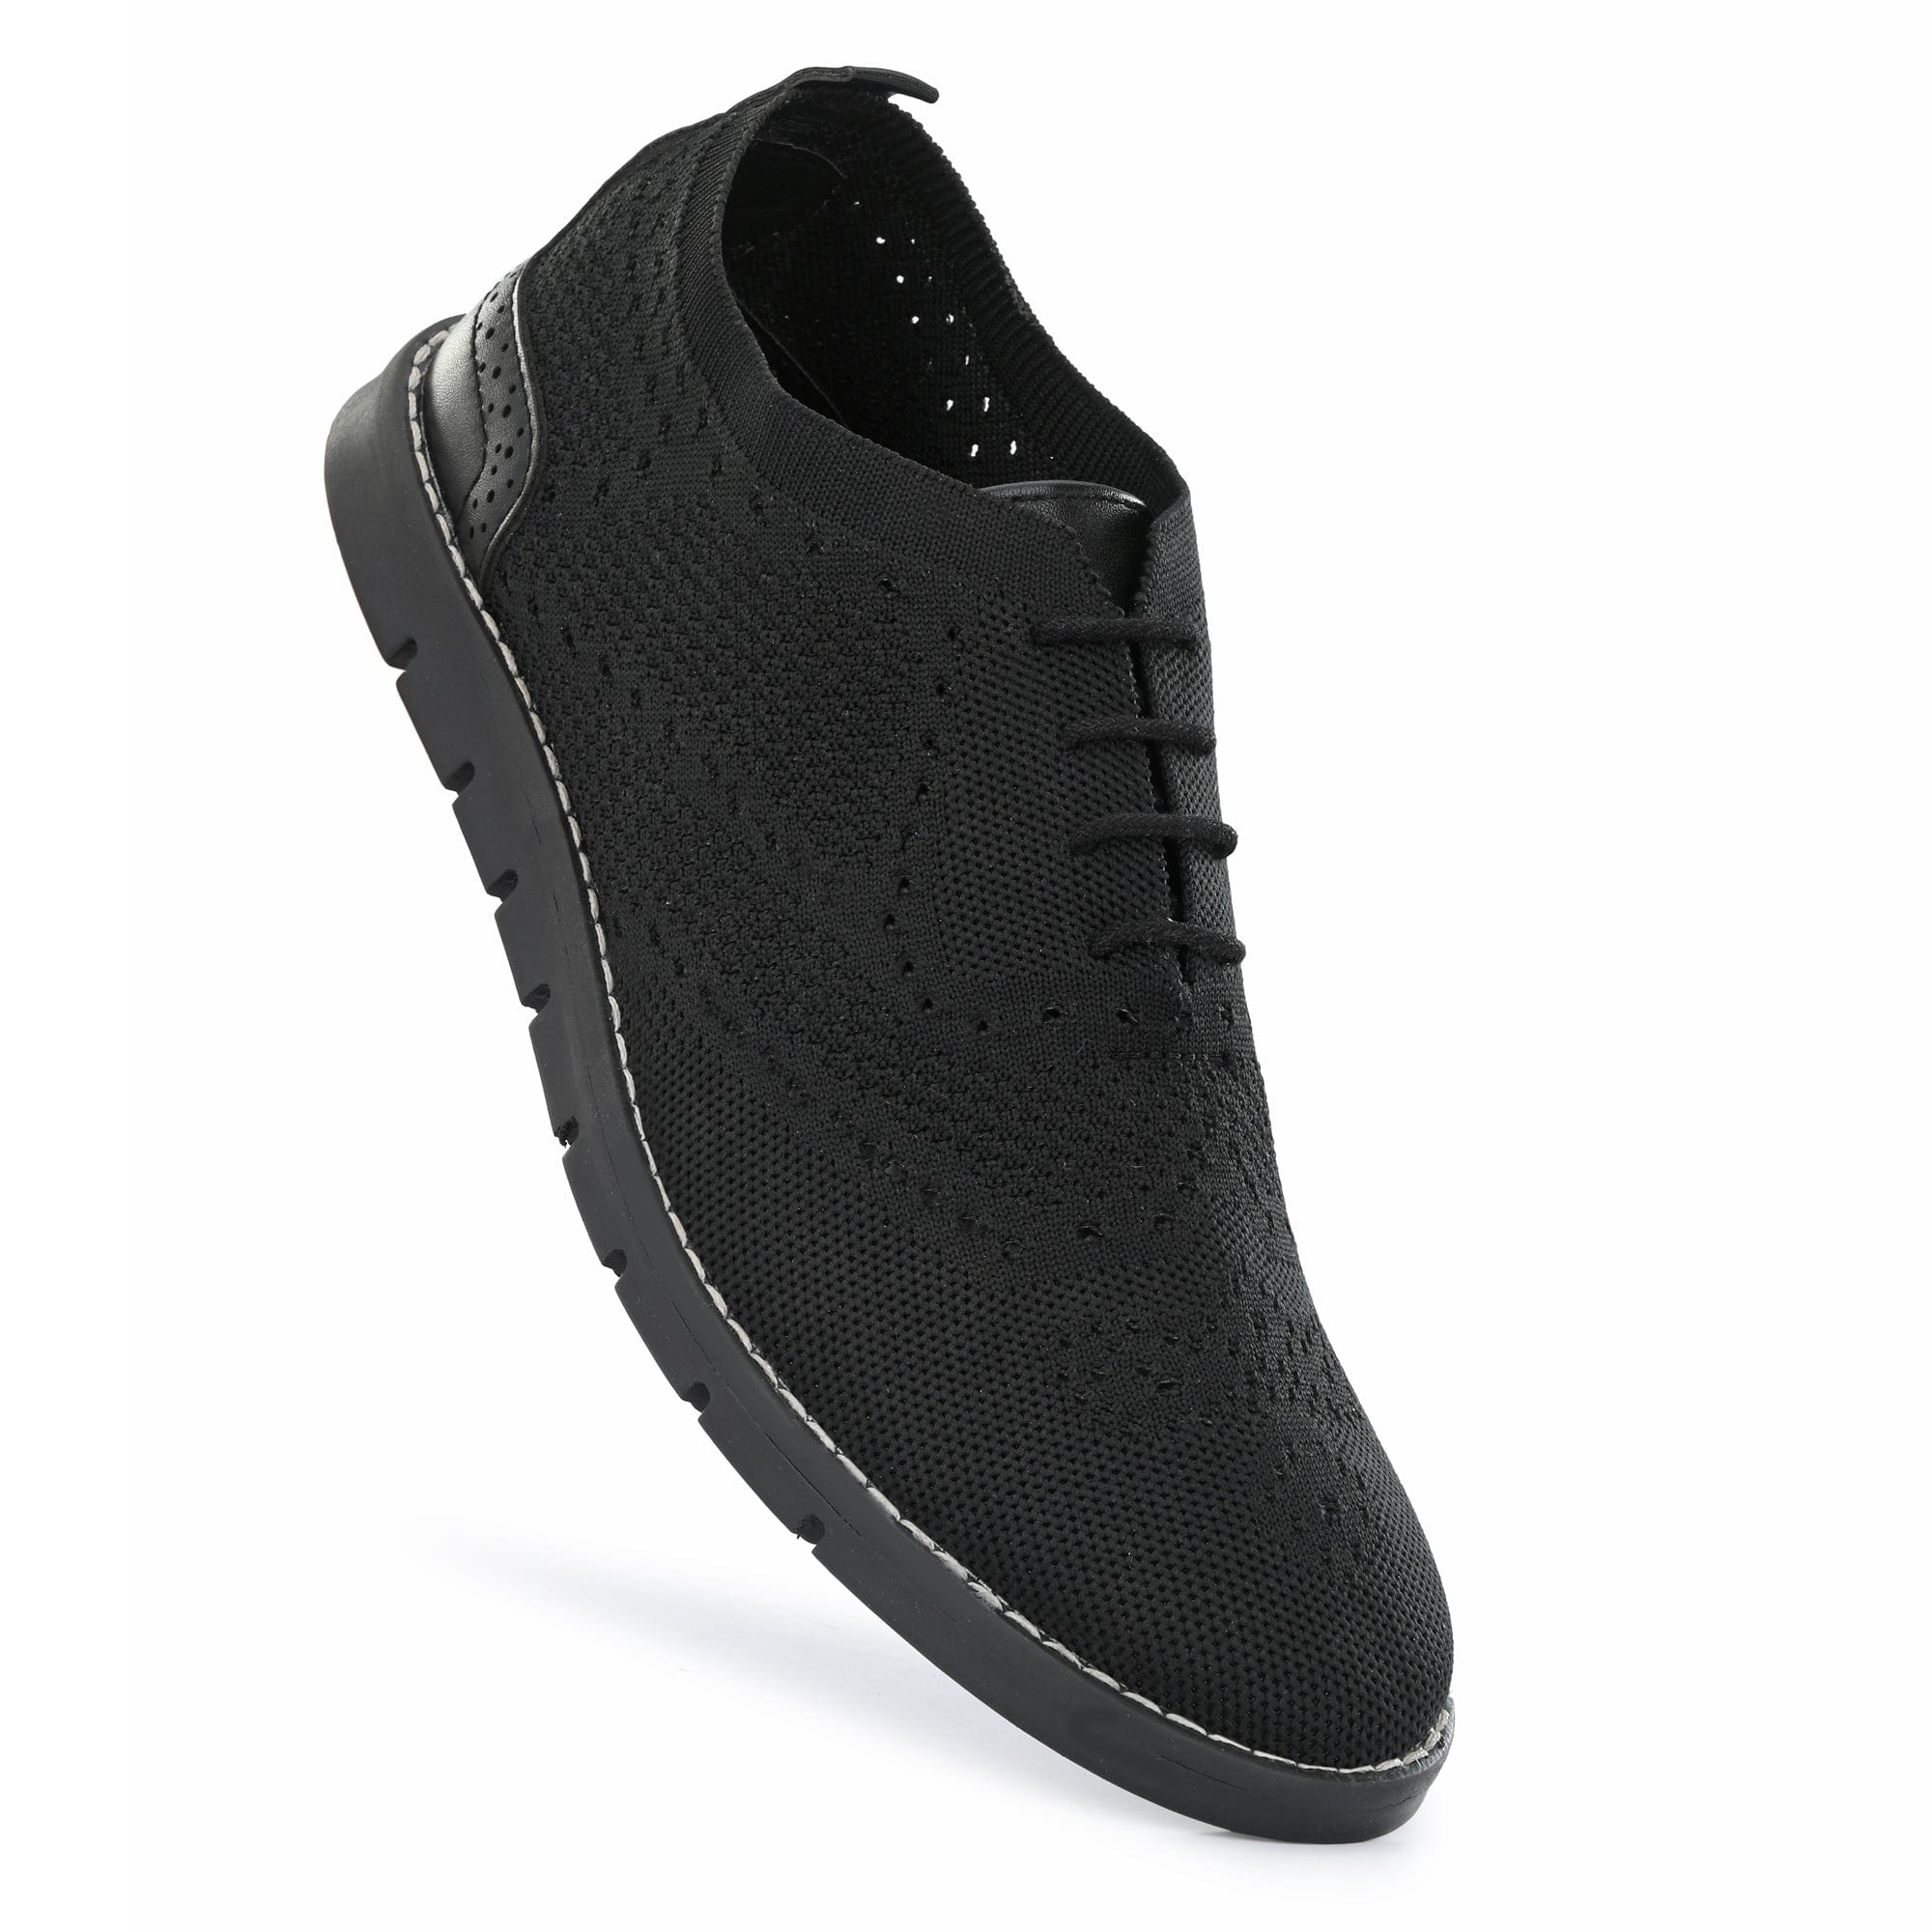 Legwork SWIFTKNIT™ 100% Recycled Plastic Knitted Oxford Dress Shoes